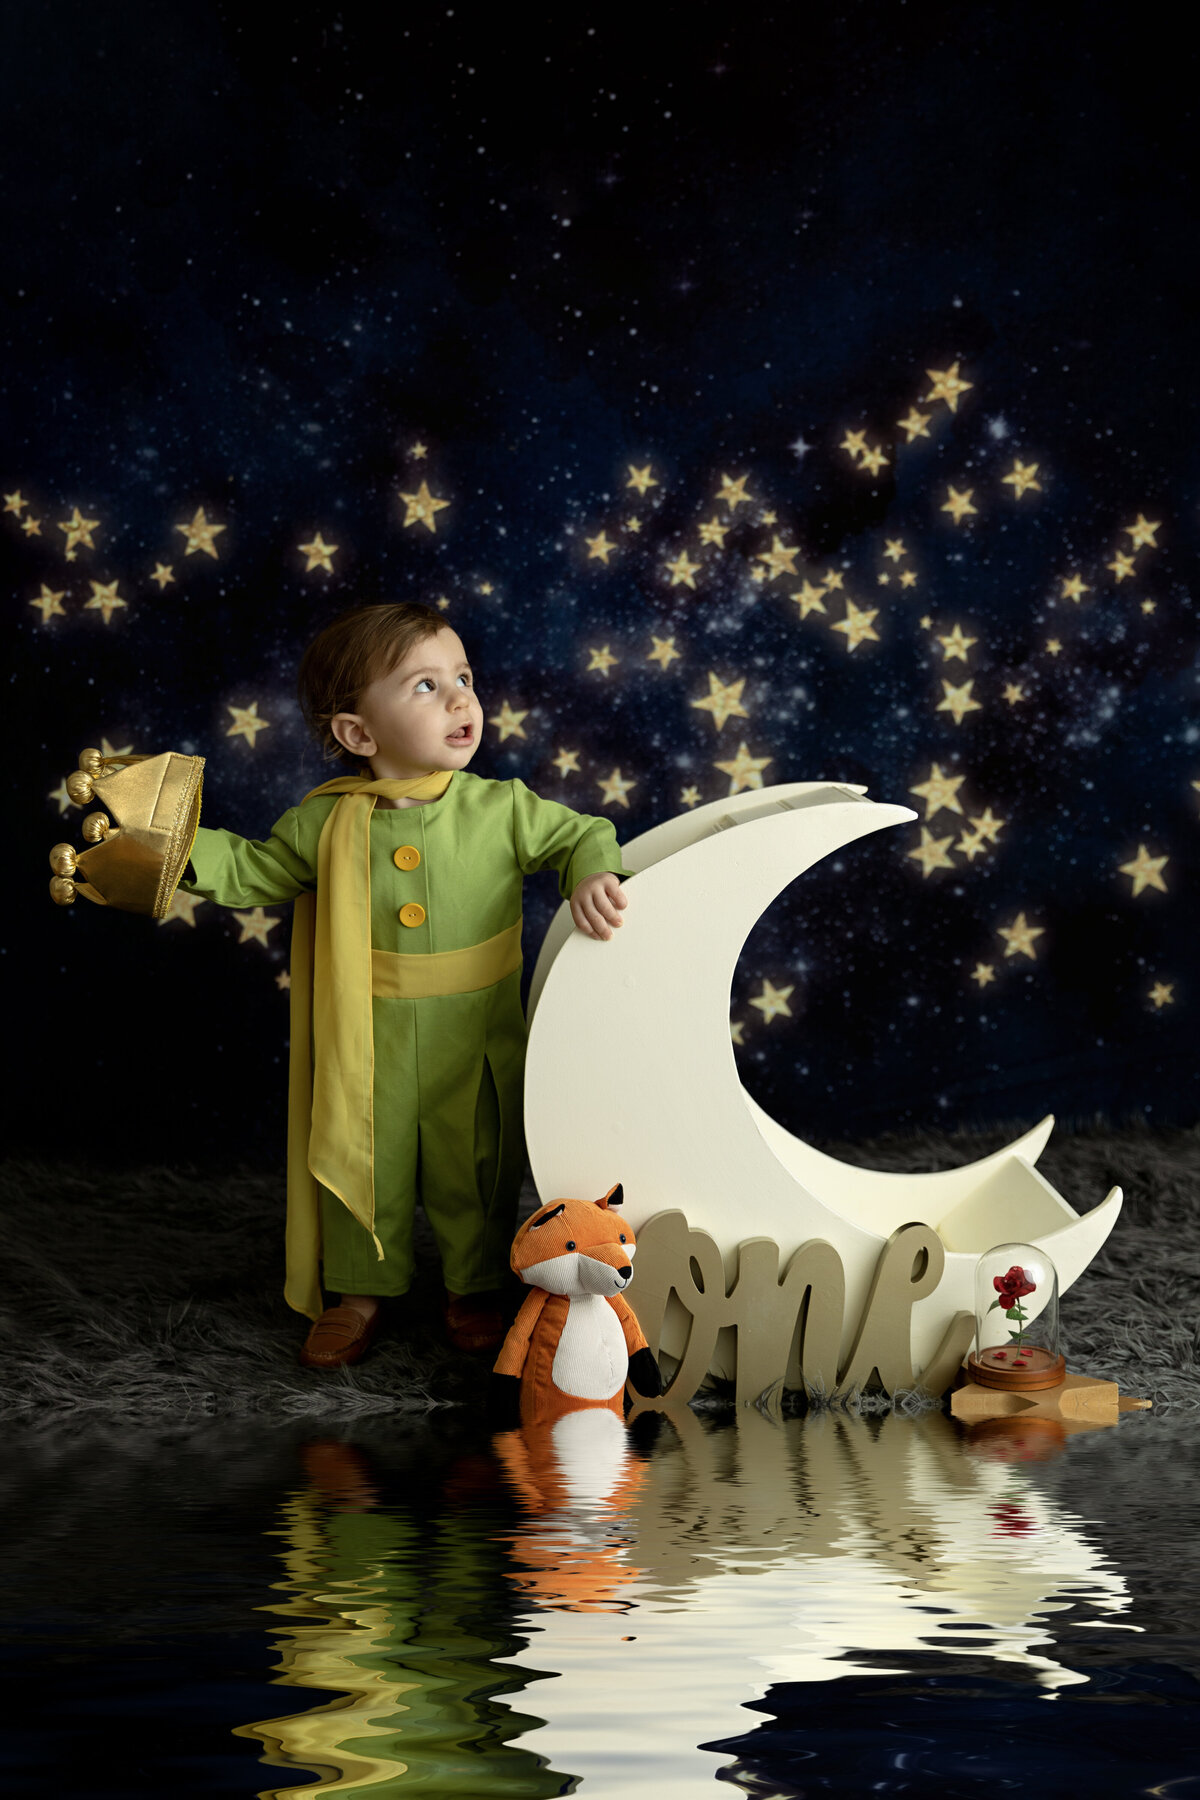 A toddler prince in a green outfit explores a moon shaped bed and a star background for his first birthday